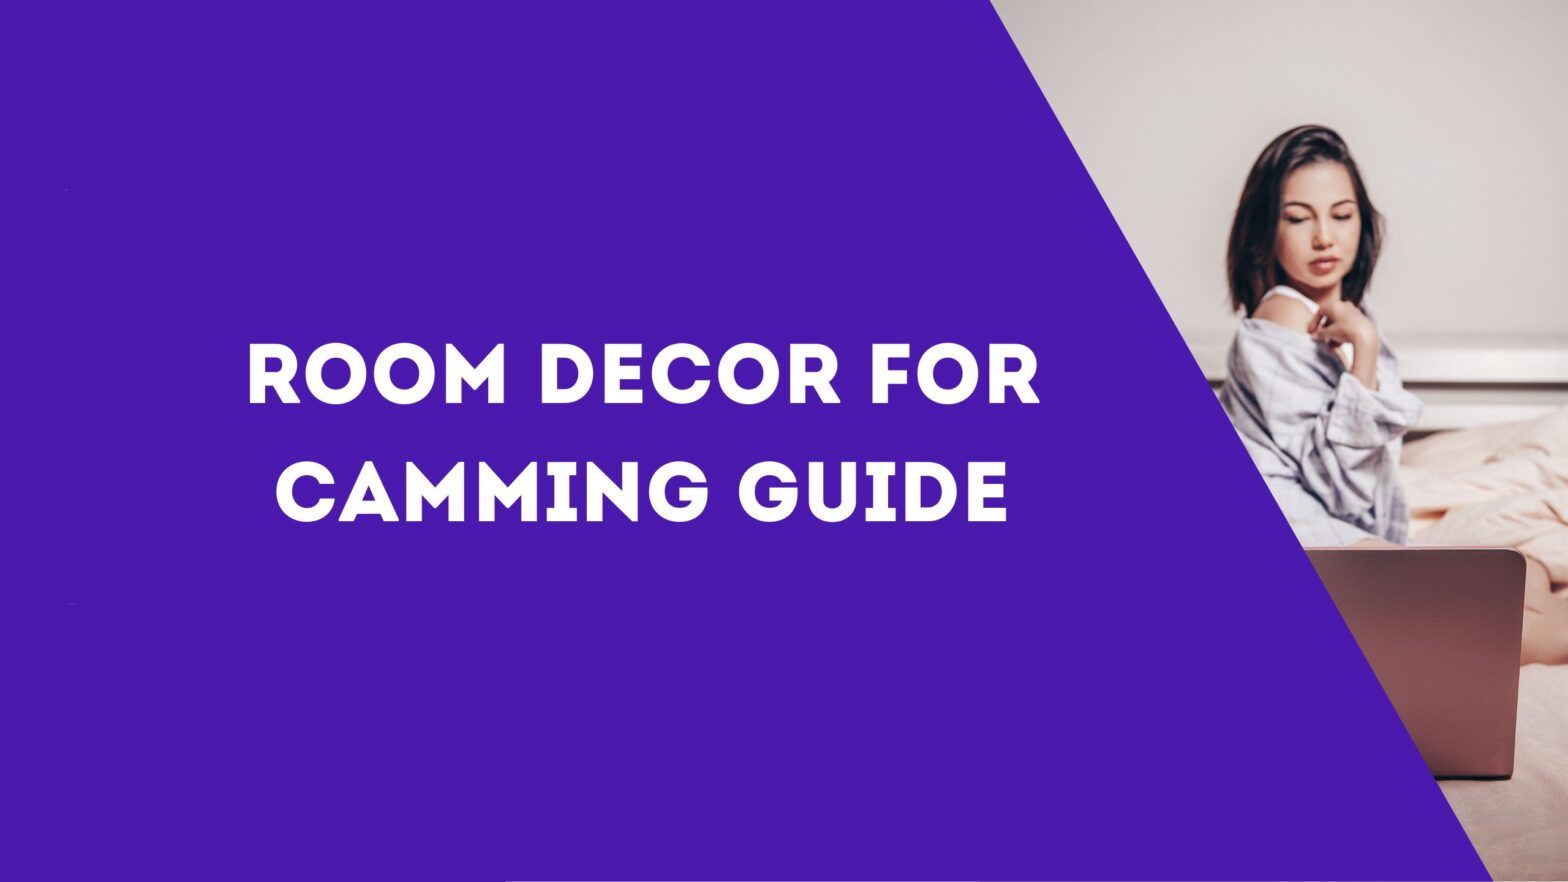 Room Decor for Camming Guide